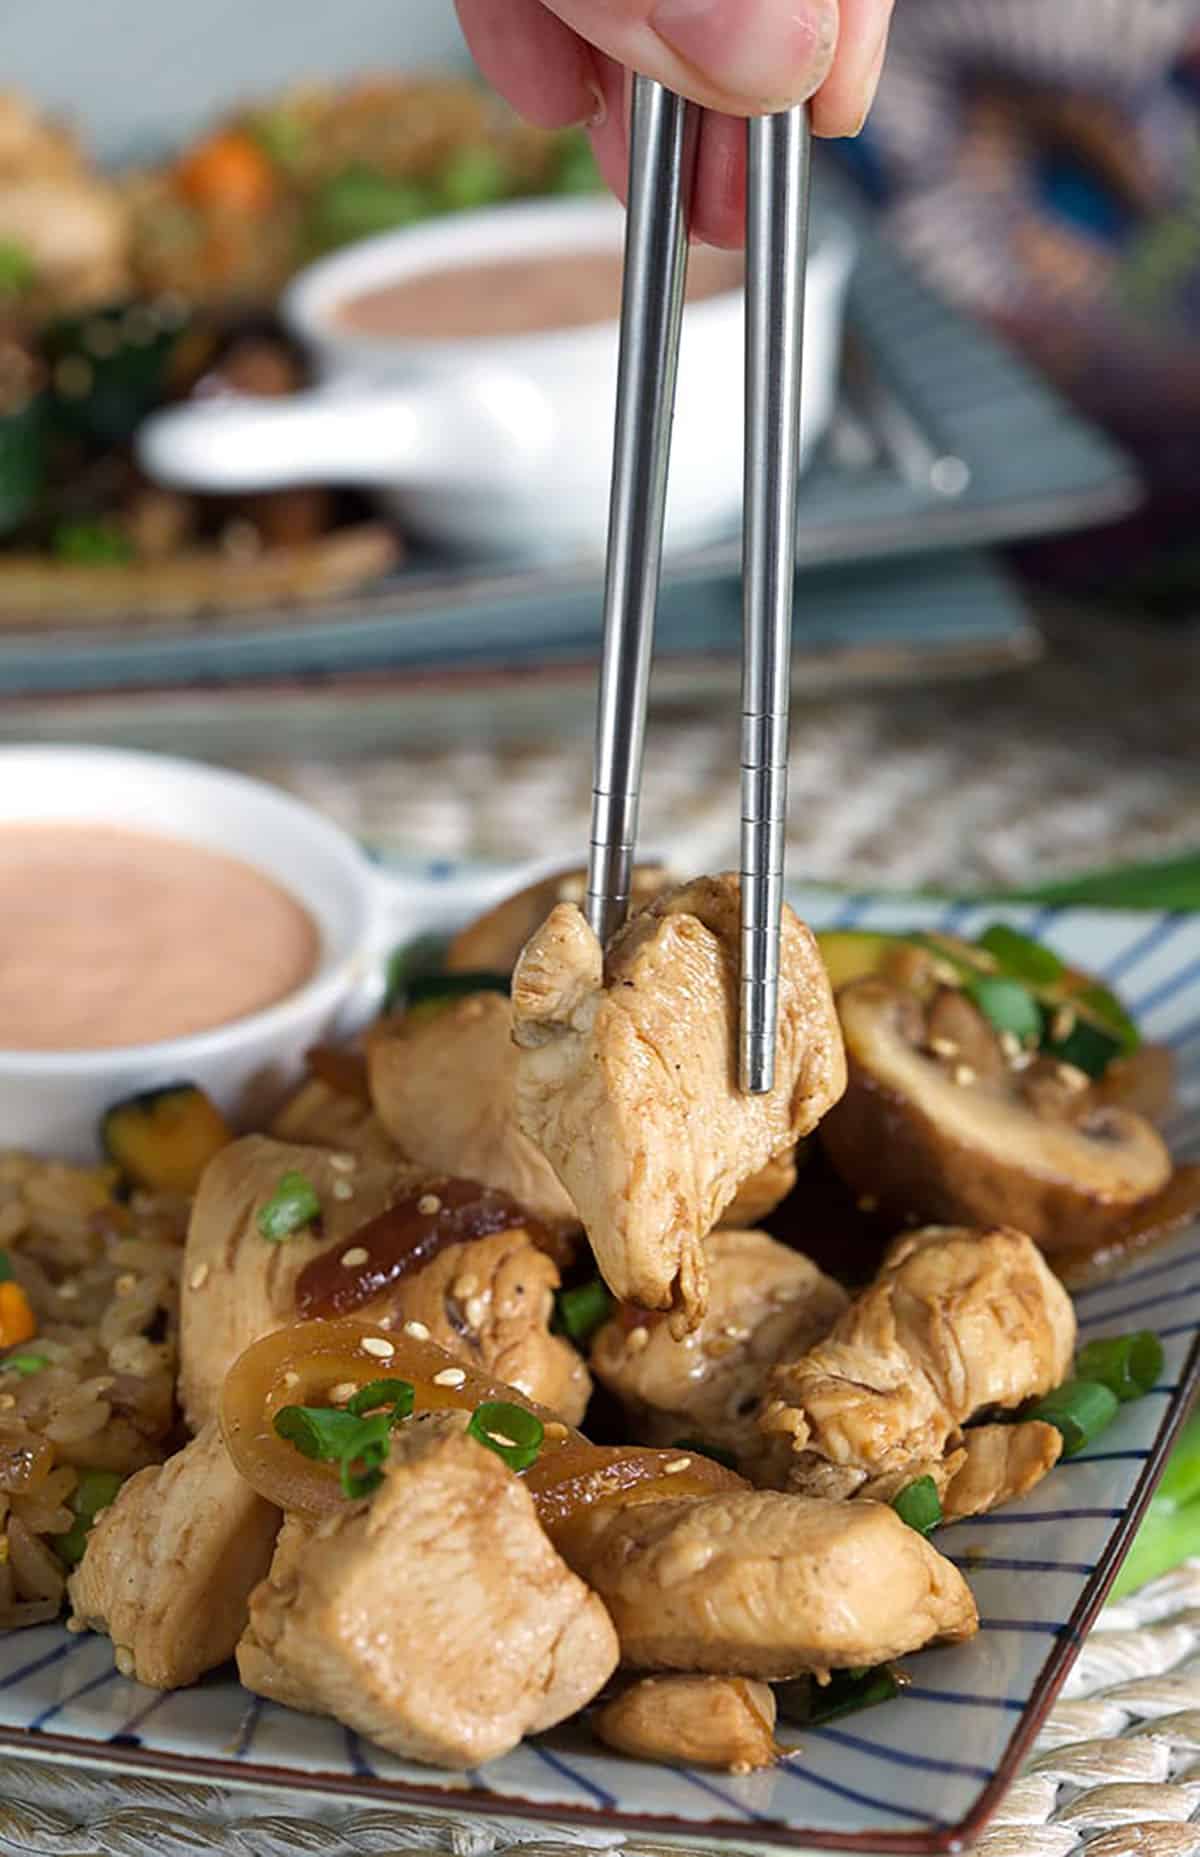 Hibachi chicken being picked up with silver chopsticks